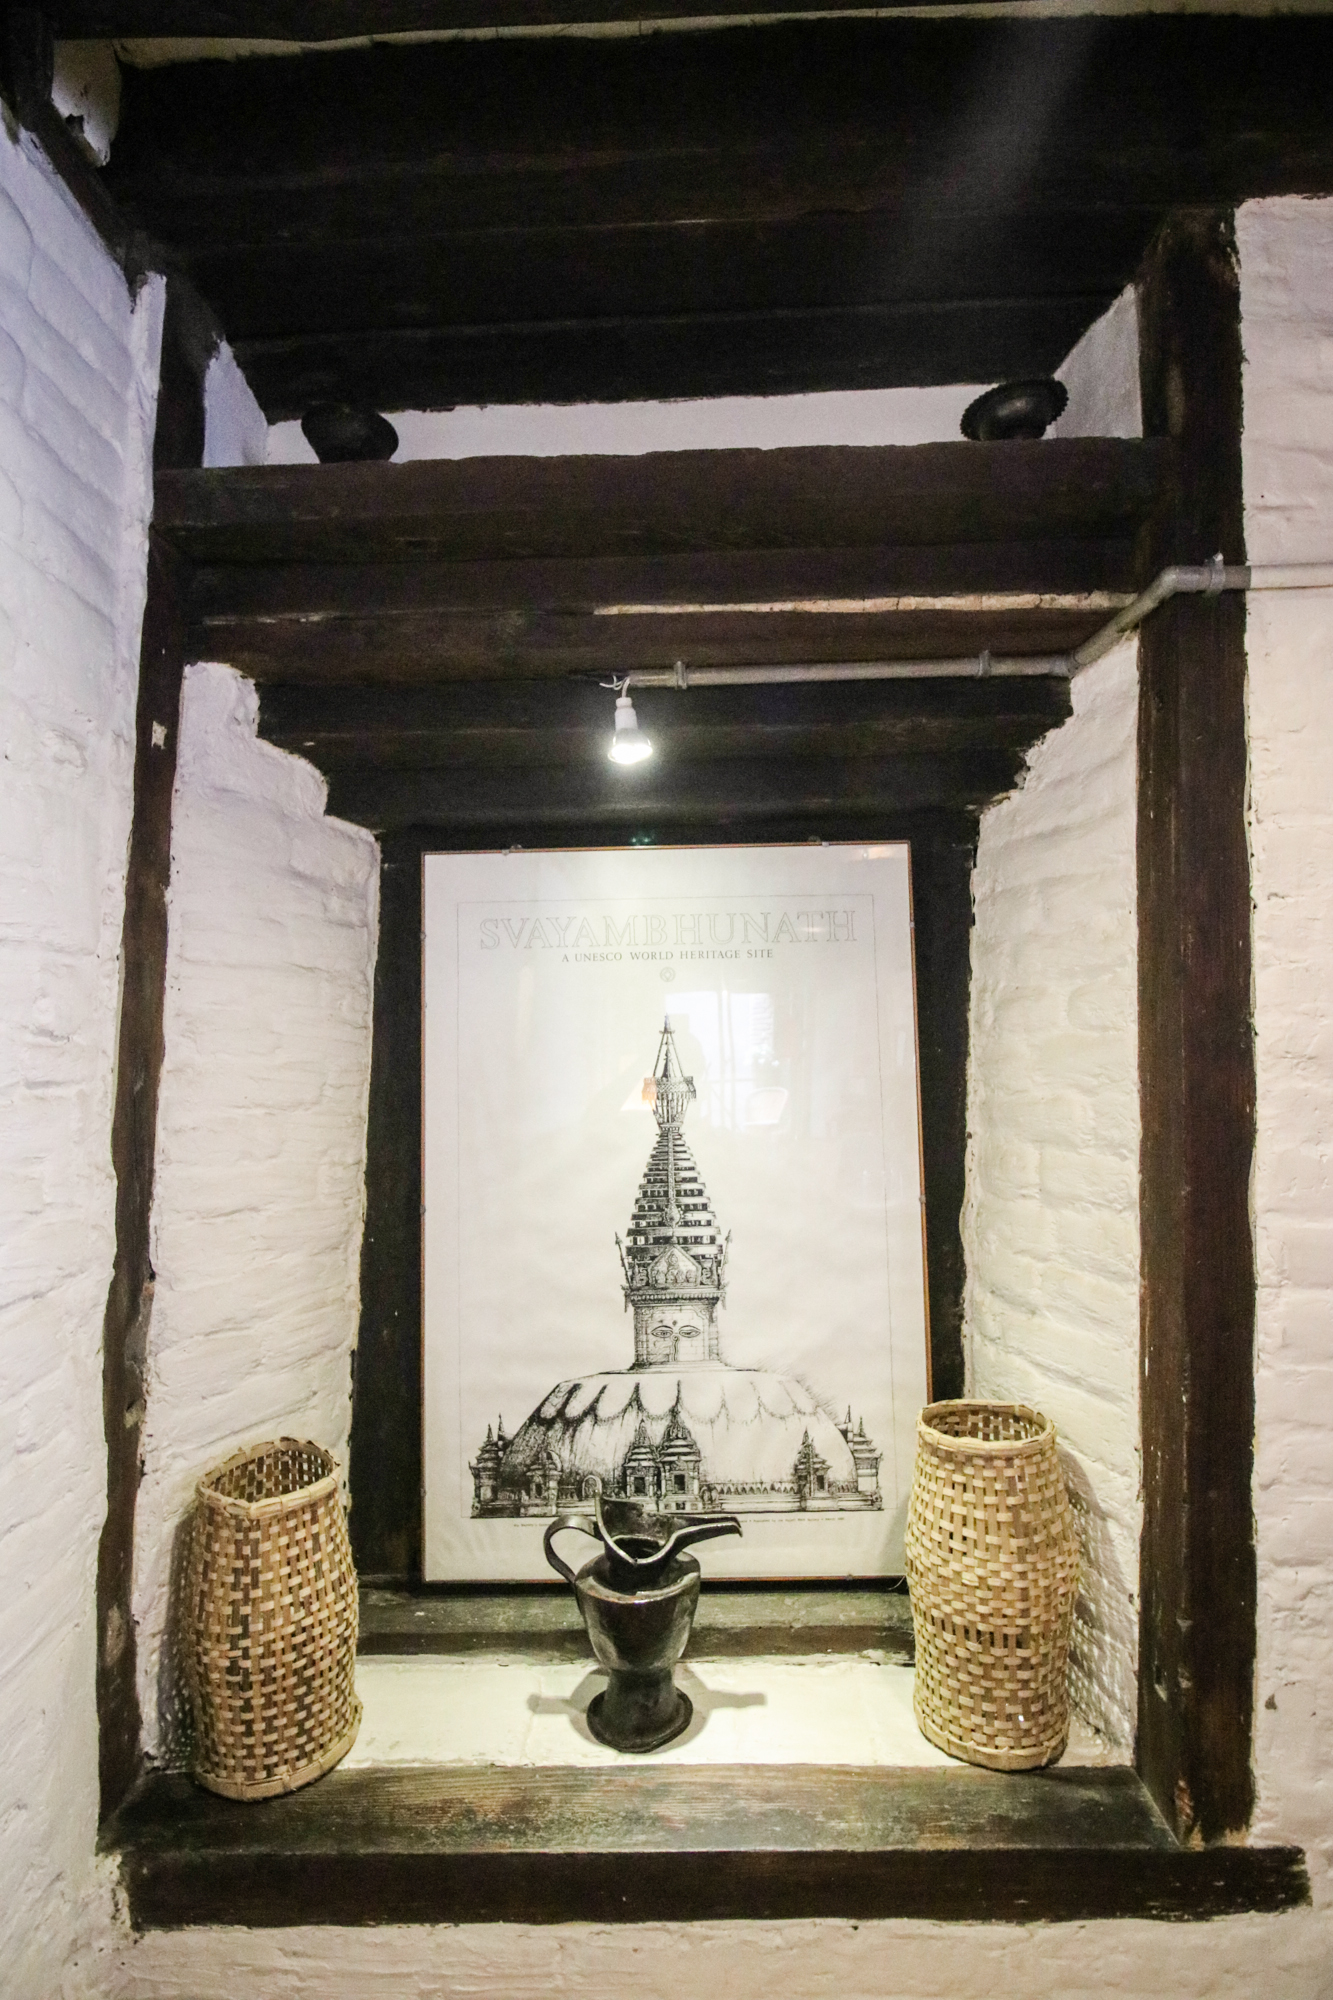  this is the printed picture of Swyambhunath Stupa, one of the famous religious site in Kathmandu Valley. 